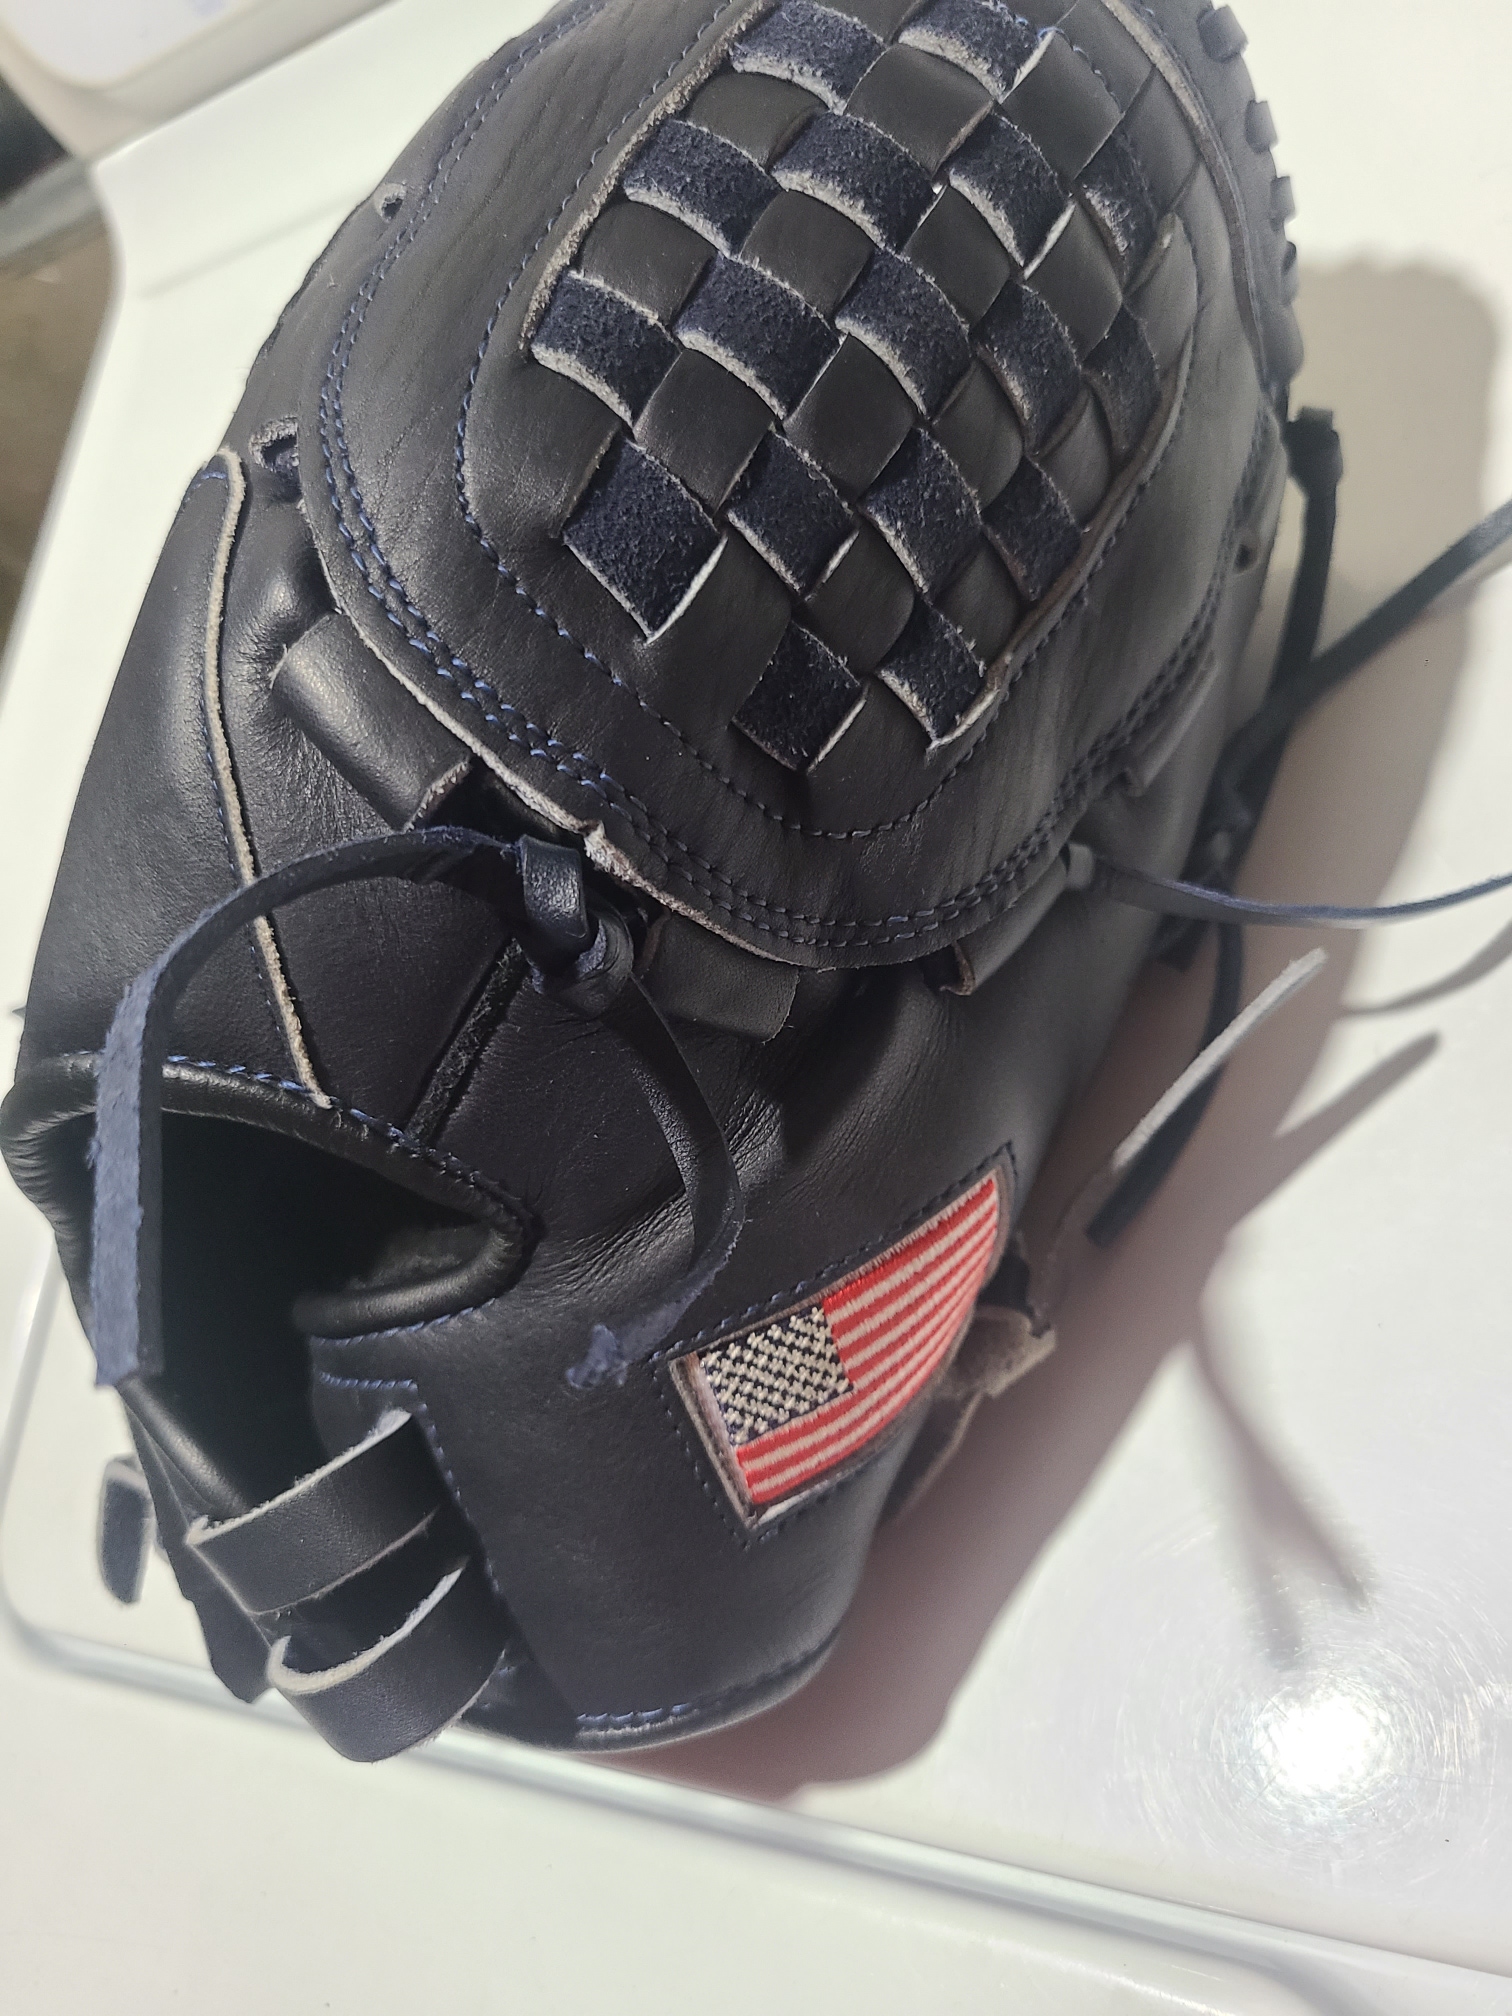 New without tags Right Hand Throw Rawlings Worth Outfield Softball Glove 12.5"